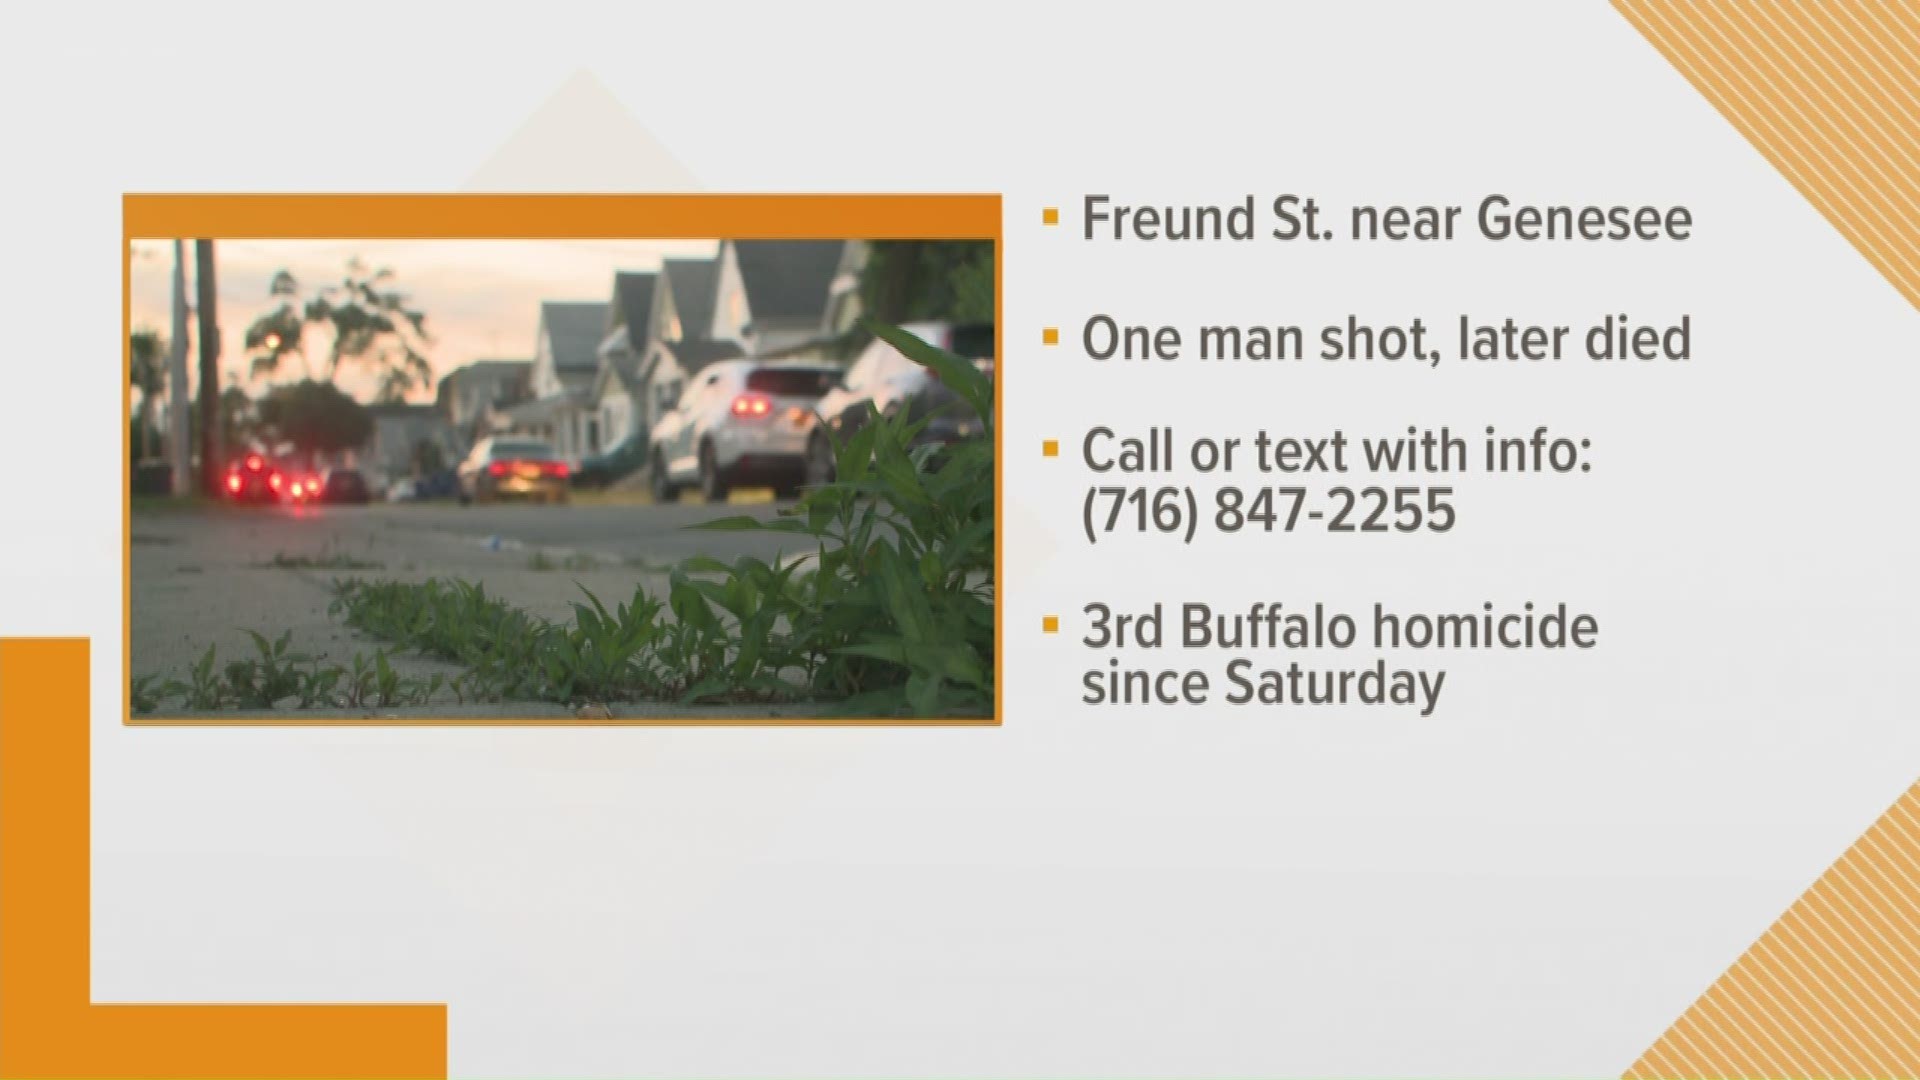 The 27-year-old man who was shot last night on Freund Street... has died from his injuries.